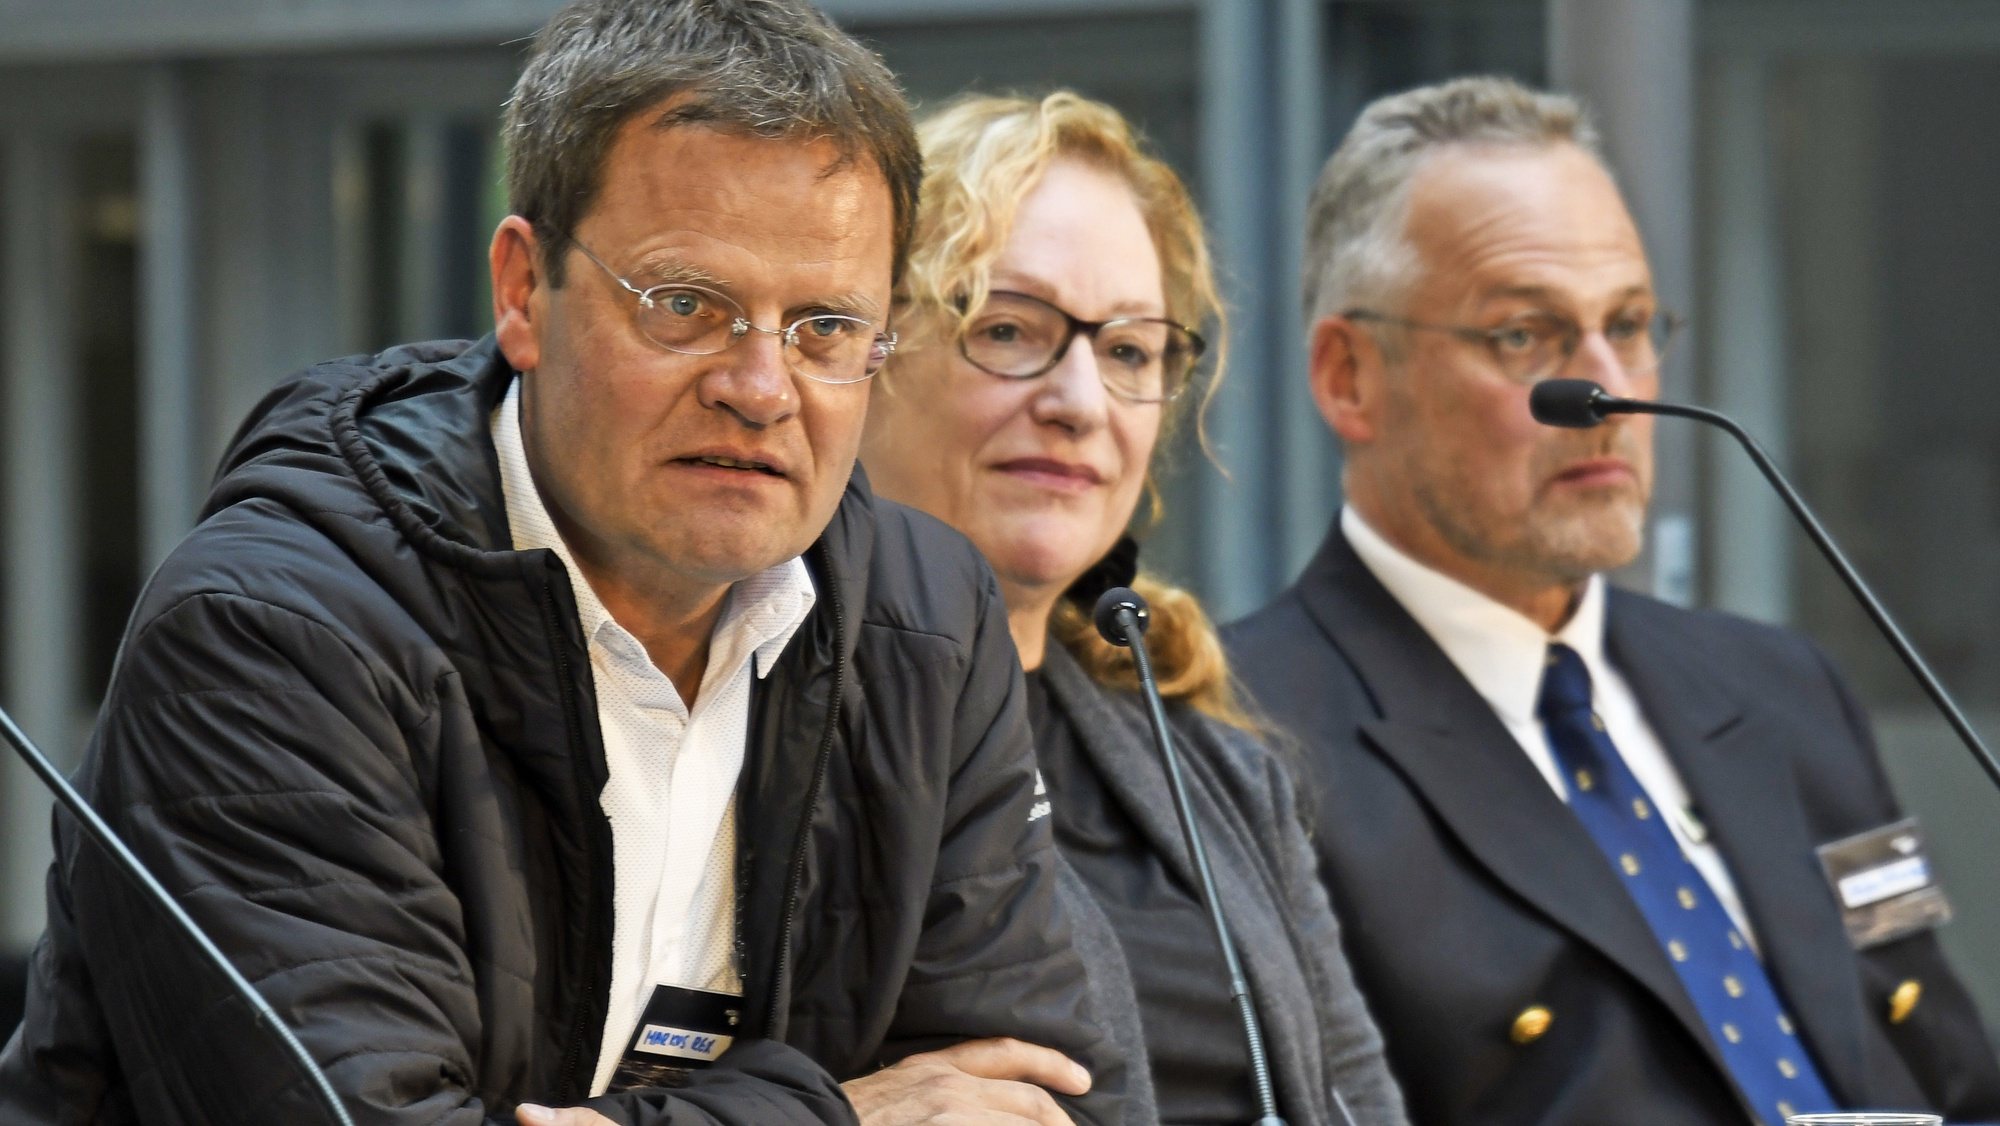 epa07855989 (L-R) Expedition leader Markus Rex, researcher Pauline Snoeijs-Leijonmalm, and captain Stefan Schwarze attend a press conference  on the polar expedition MOSAiC with the vessel &#039;Polarstern&#039; in Tromso, Norway, 20 September 2019. The German research icebreaker &#039;Polarstern&#039; is set to leave Tromso, Norway to spend a year drifting through the Arctic Ocean trapped in ice.  EPA/Rune Stoltz Bertinussen  NORWAY OUT